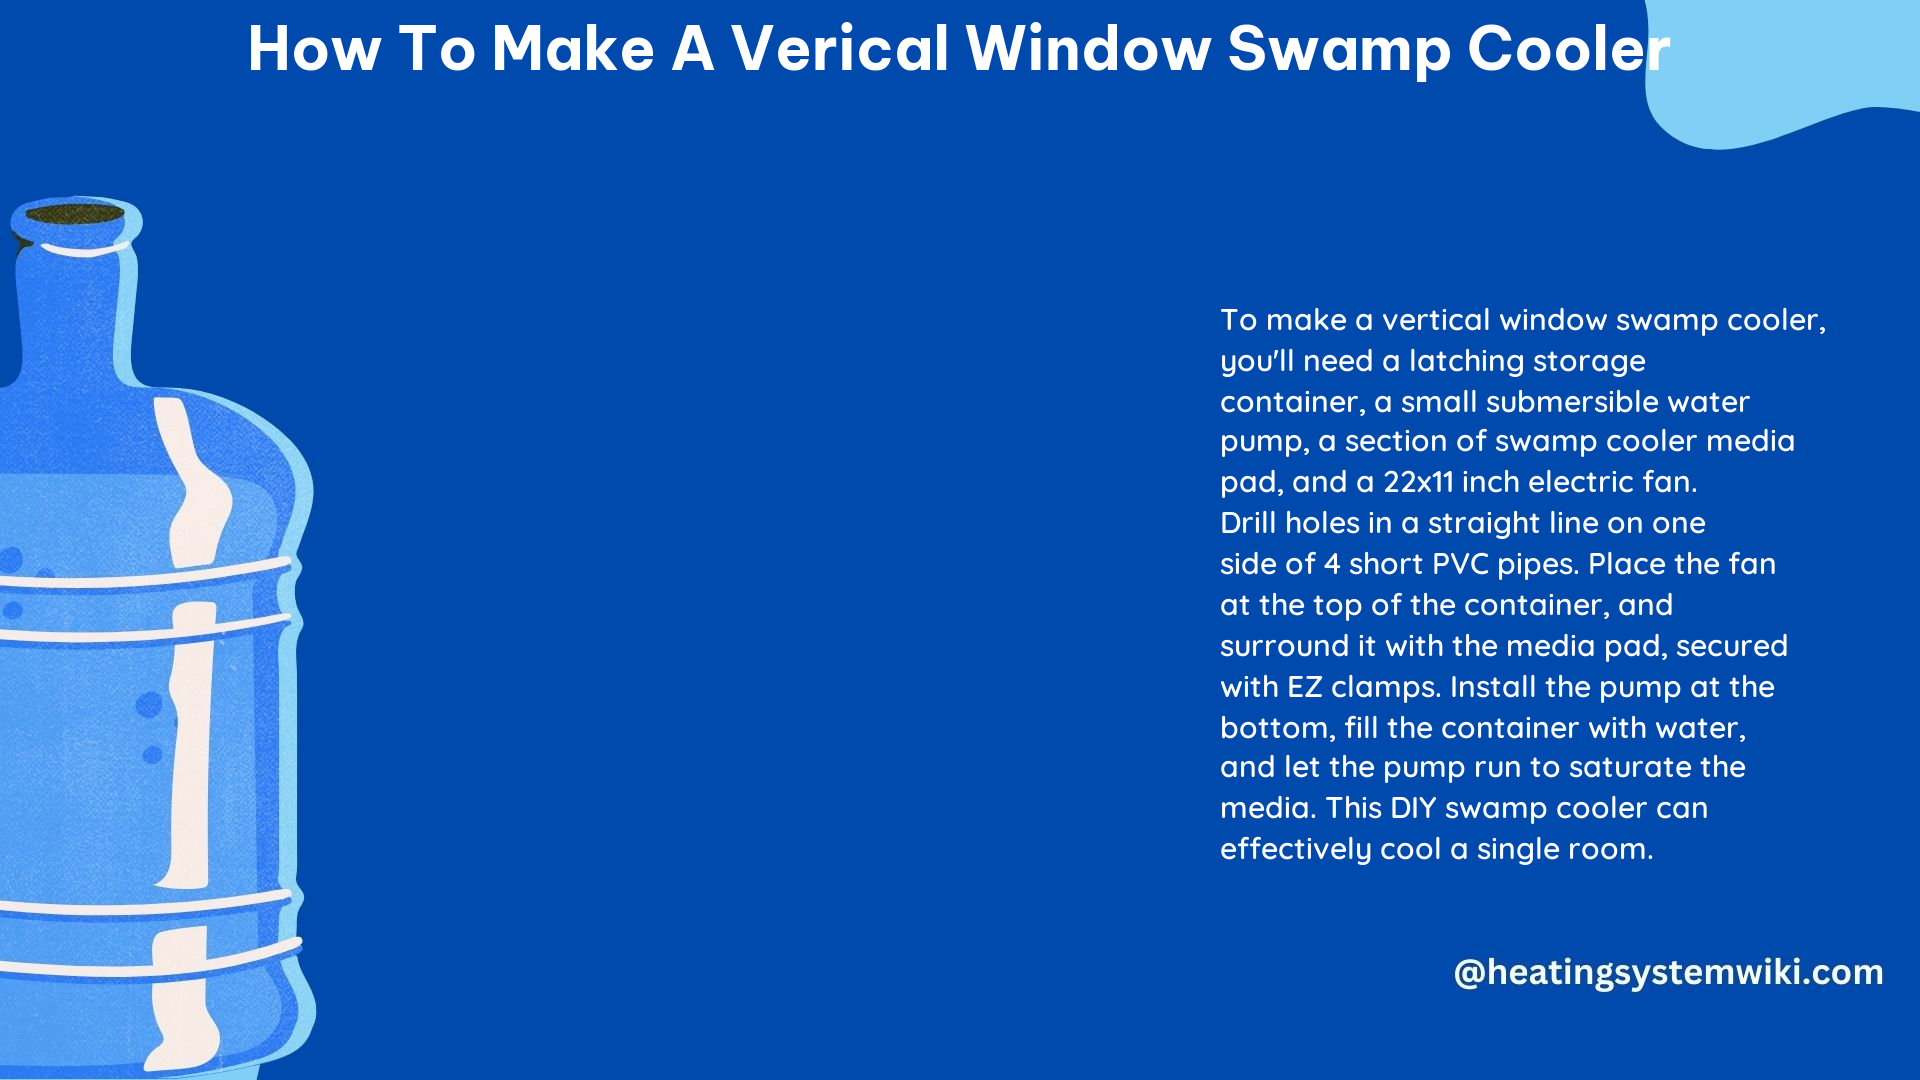 How to Make a Verical Window Swamp Cooler